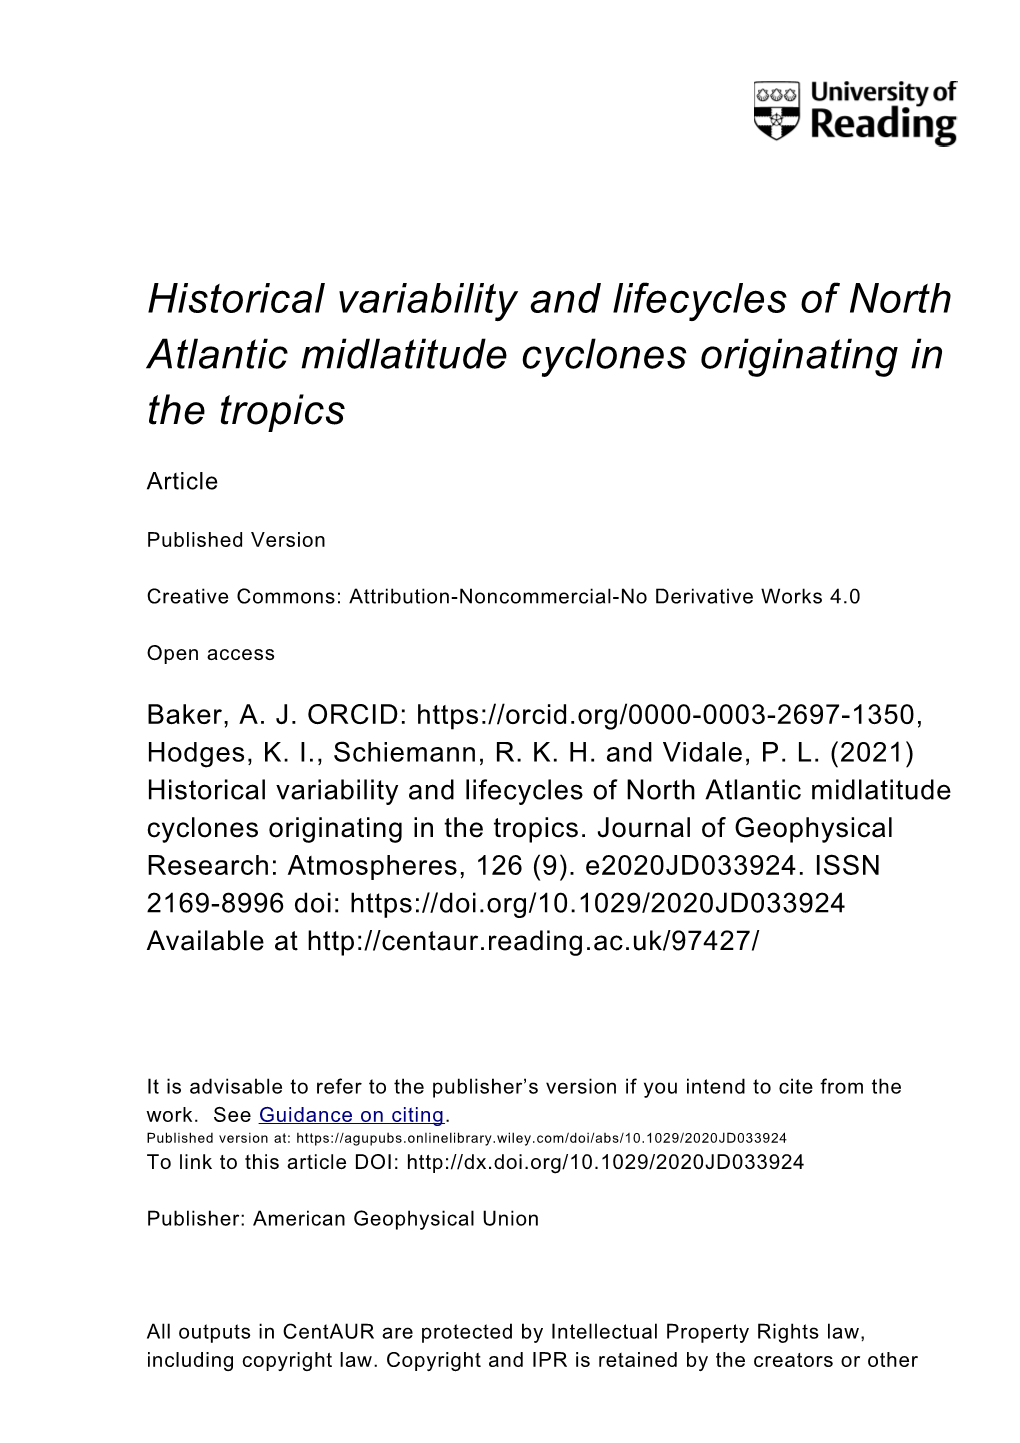 Historical Variability and Lifecycles of North Atlantic Midlatitude Cyclones Originating in the Tropics